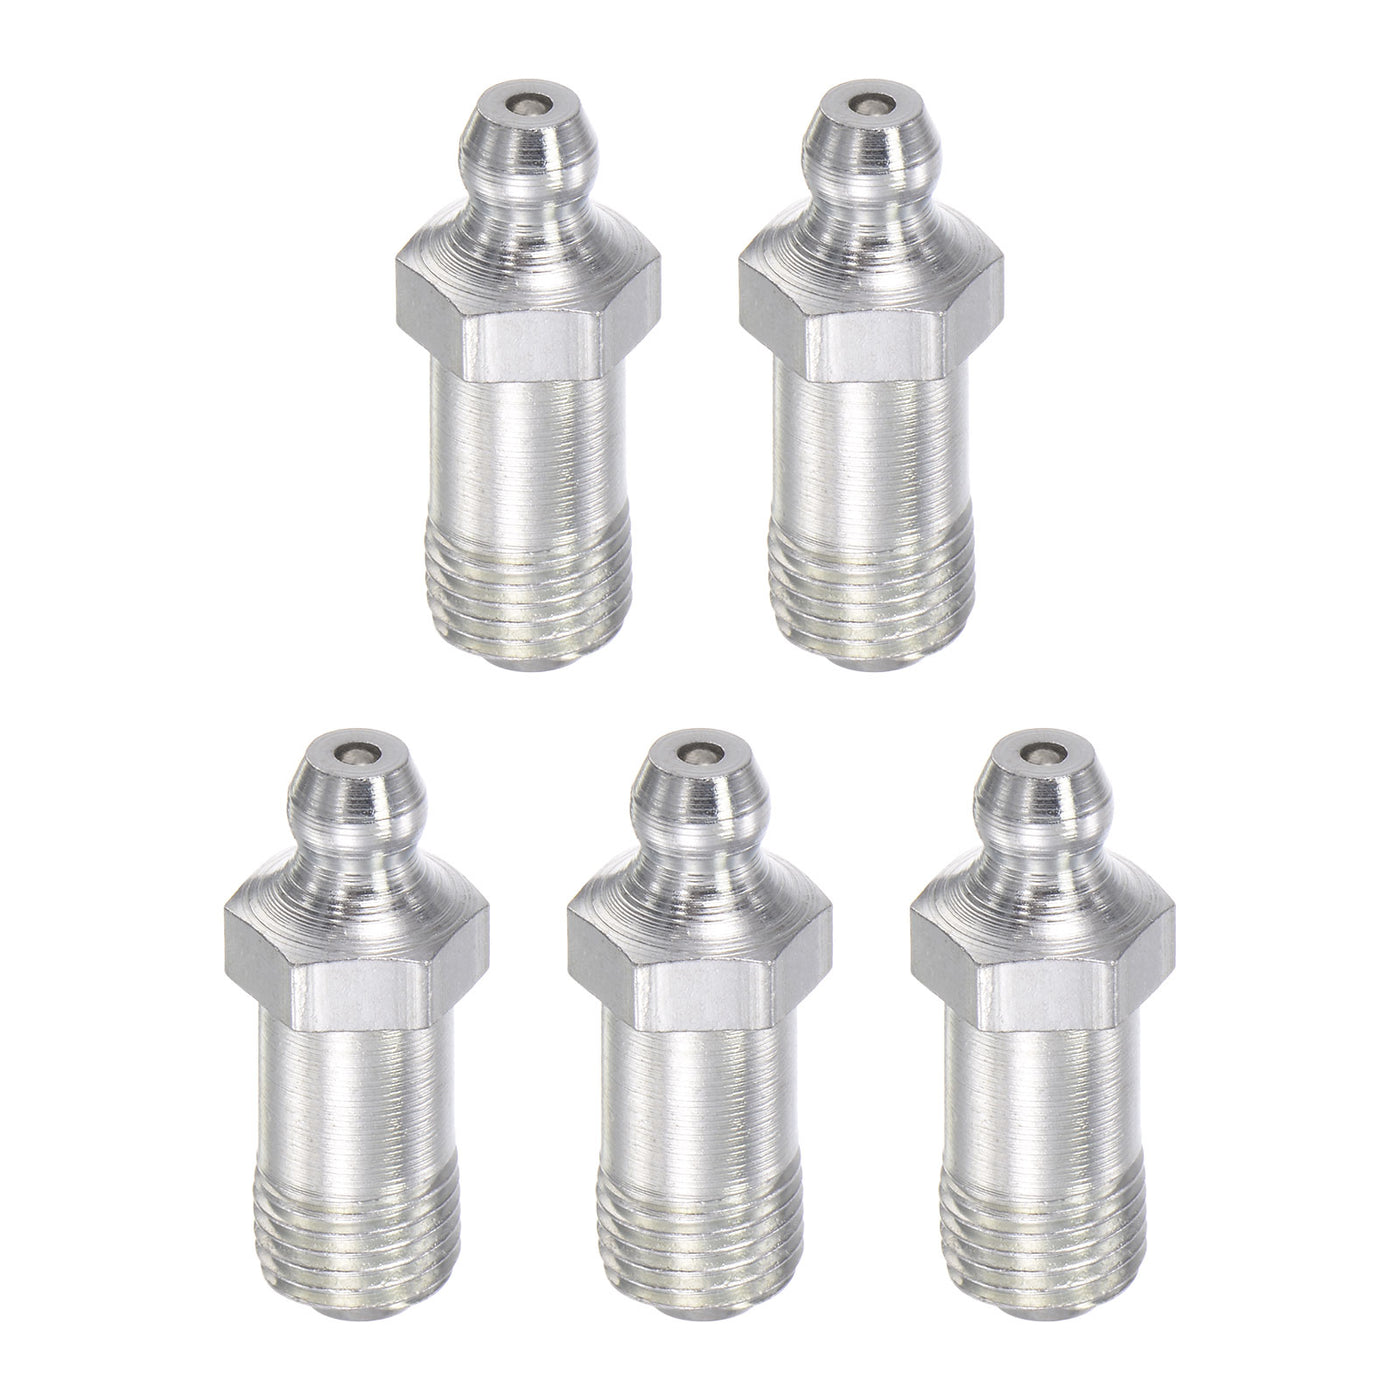 Uxcell Uxcell Steel Straight Hydraulic Grease Fitting Accessories M10 x 1mm Thread, 5Pcs